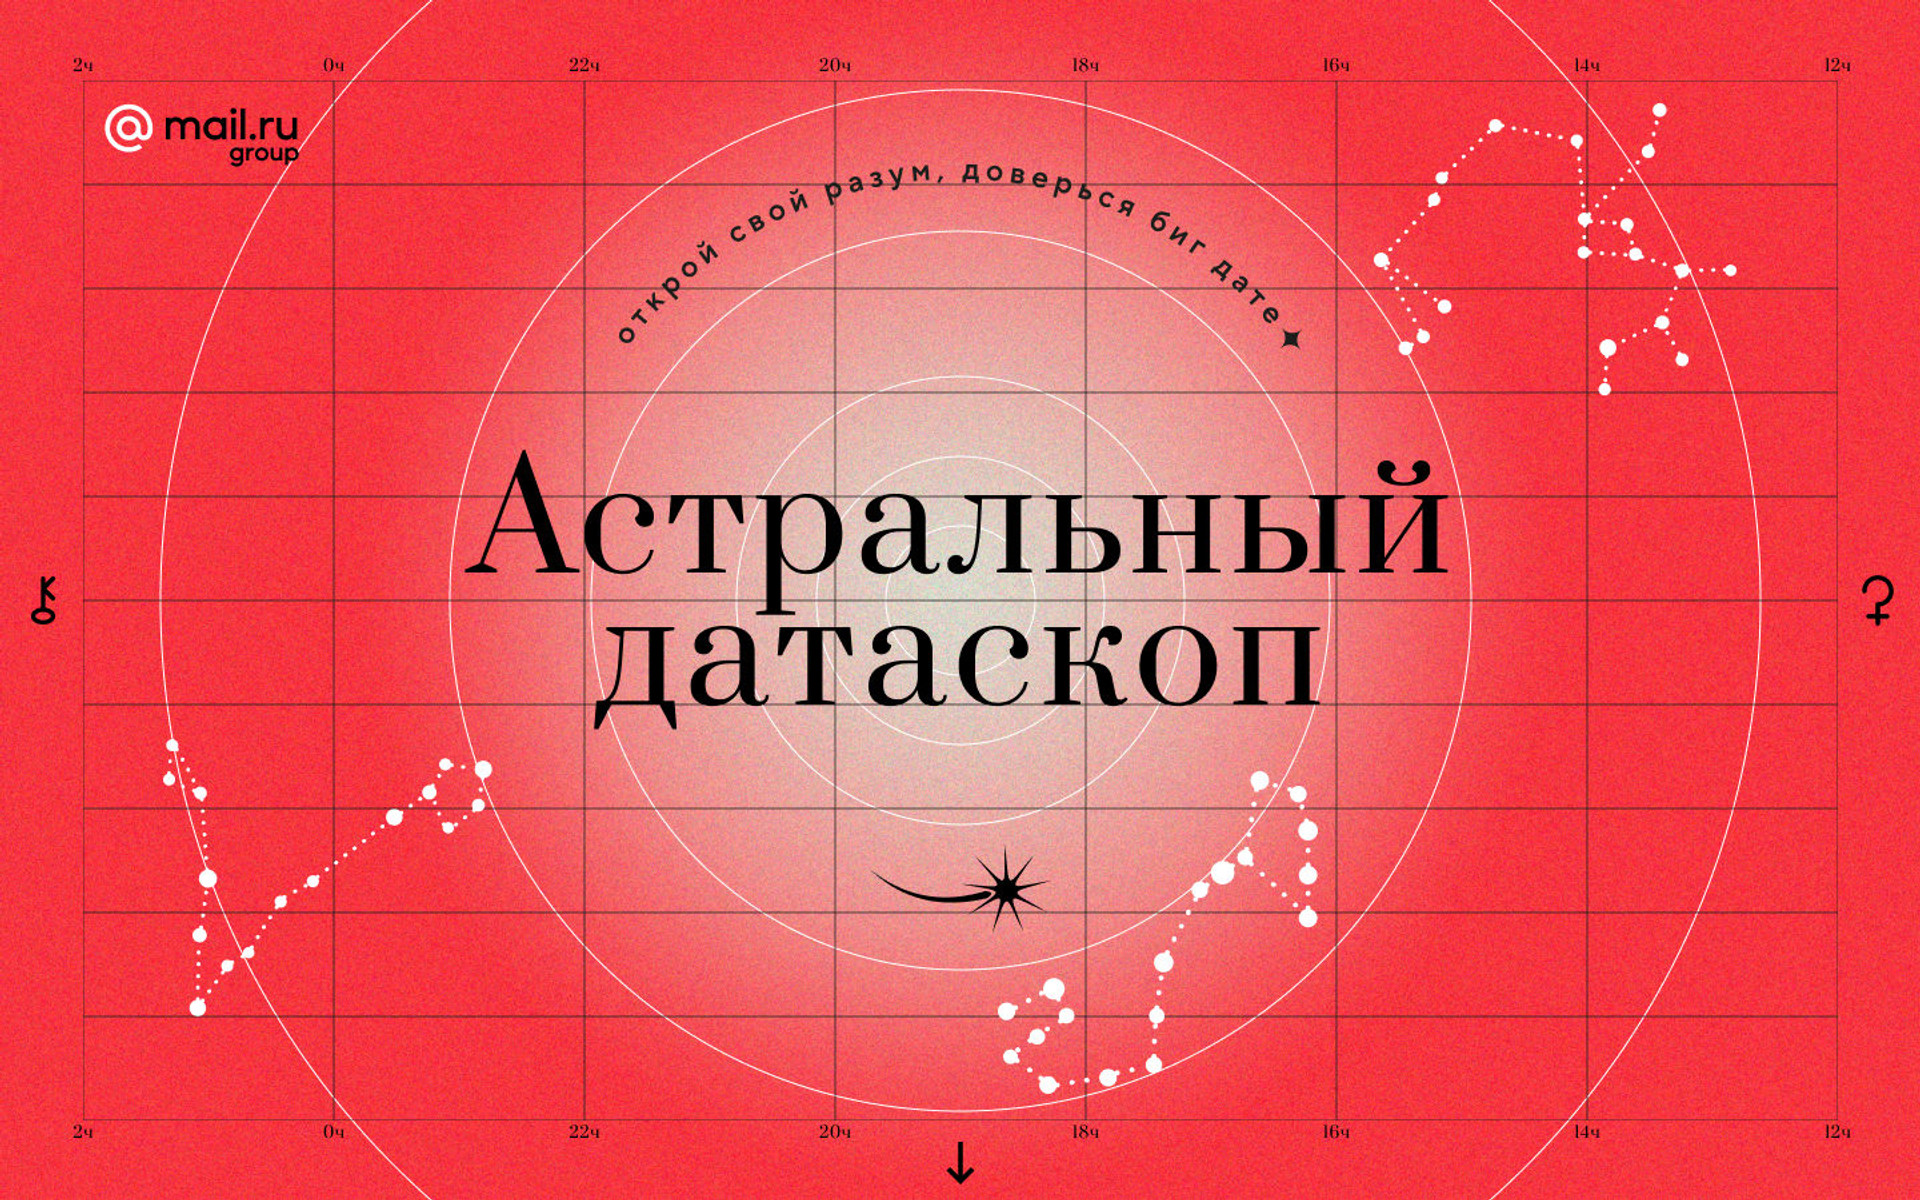 Astral Datascope by MAIL.RU Group